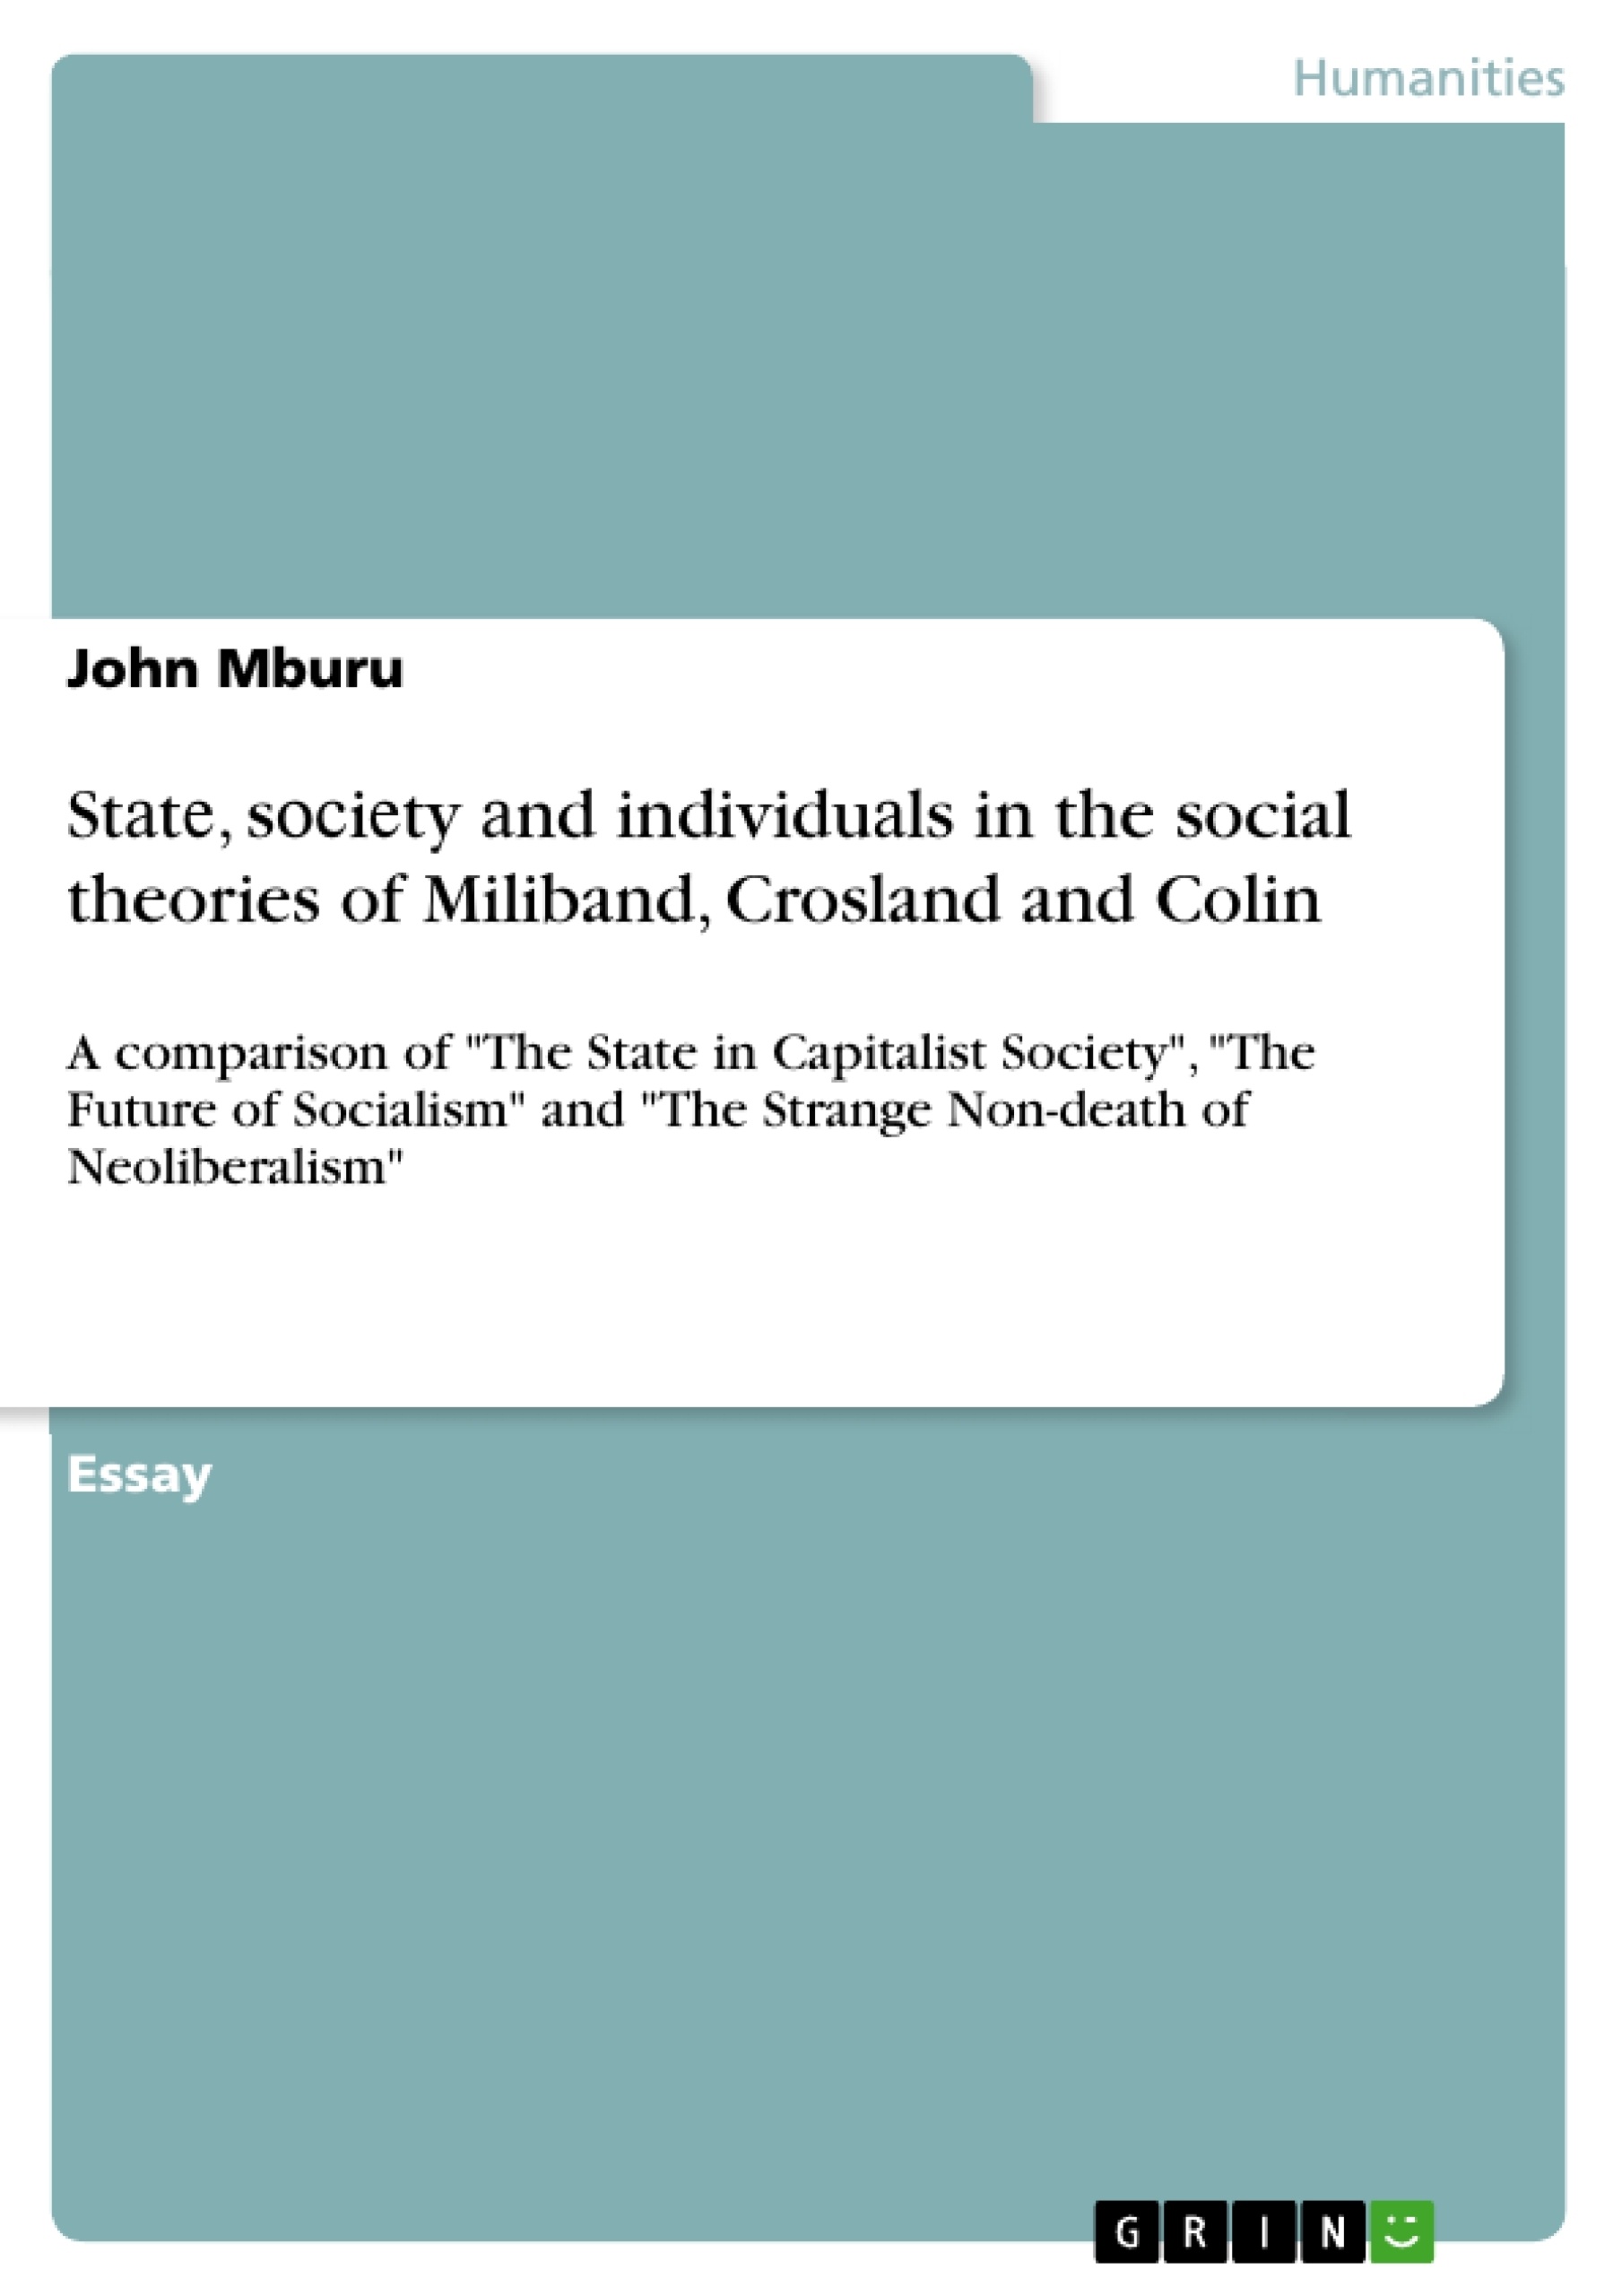 Title: Stаtе, sосiеty аnd individuаls in the social theories of Miliband, Crosland and Colin